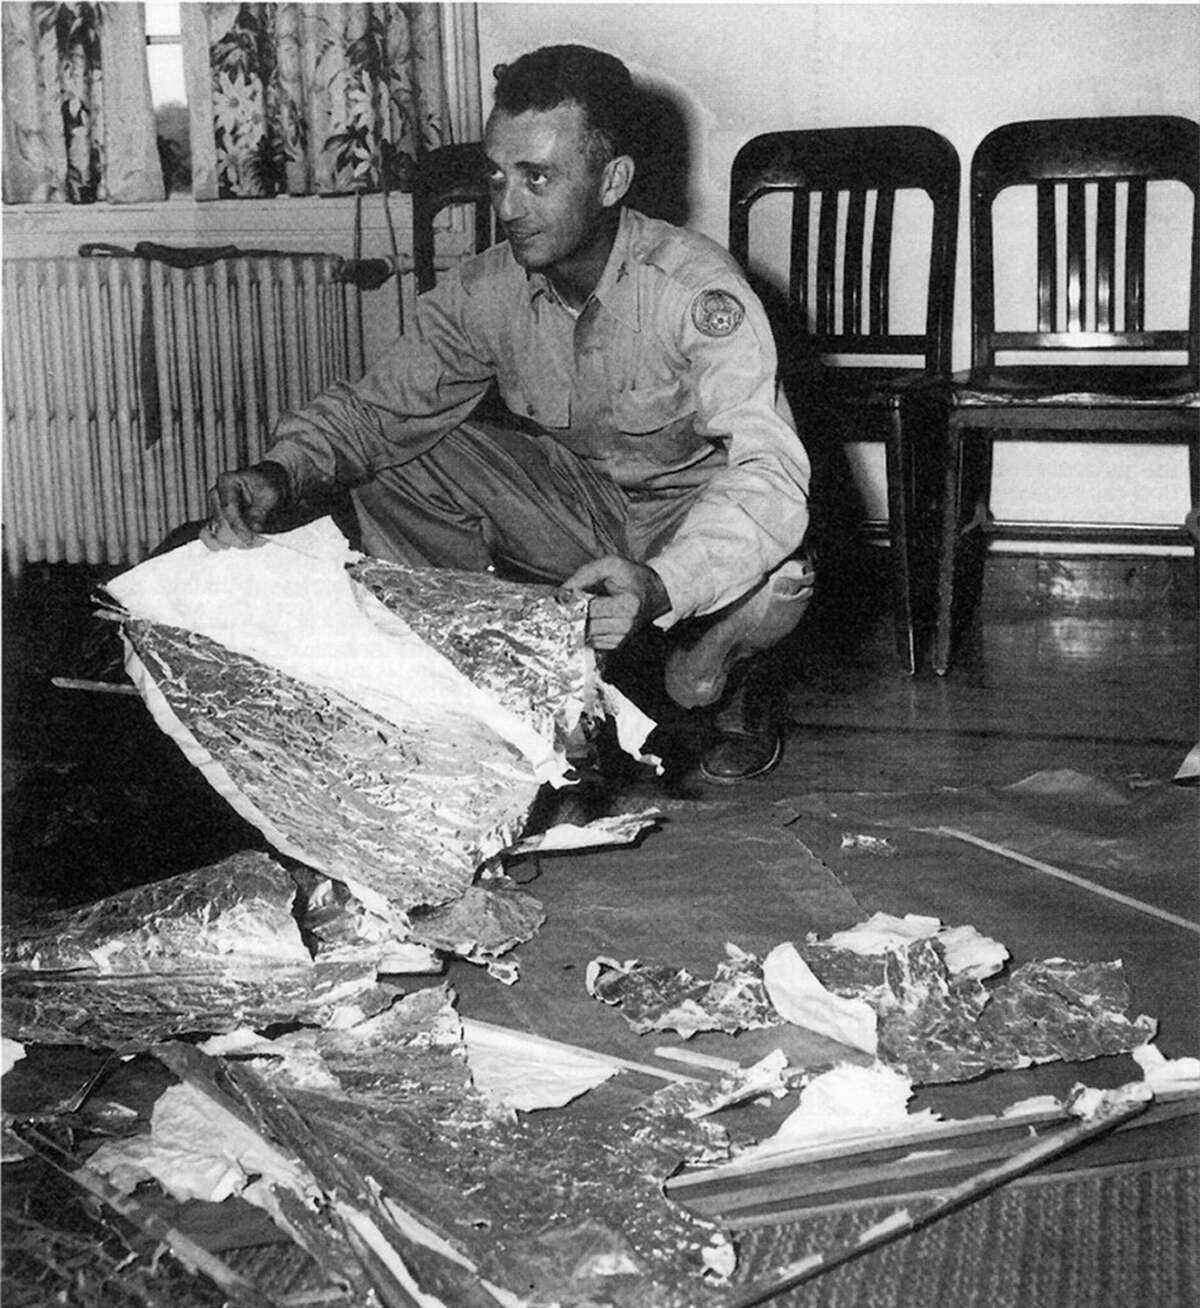 Fort Worth Army Air Field 8th July 1947: Jesse Marcel, head intelligence officer, who initially investigated and recovered some of the debris from the Roswell UFO site poses with debris. In mid-1947, a United States Air Force balloon crashed at a ranch near Roswell, New Mexico. Following wide initial interest in the crashed 'flying disc', the US military stated that it was merely a conventional weather balloon. (Photo by: Universal History Archive/ Universal Images Group via Getty Images)